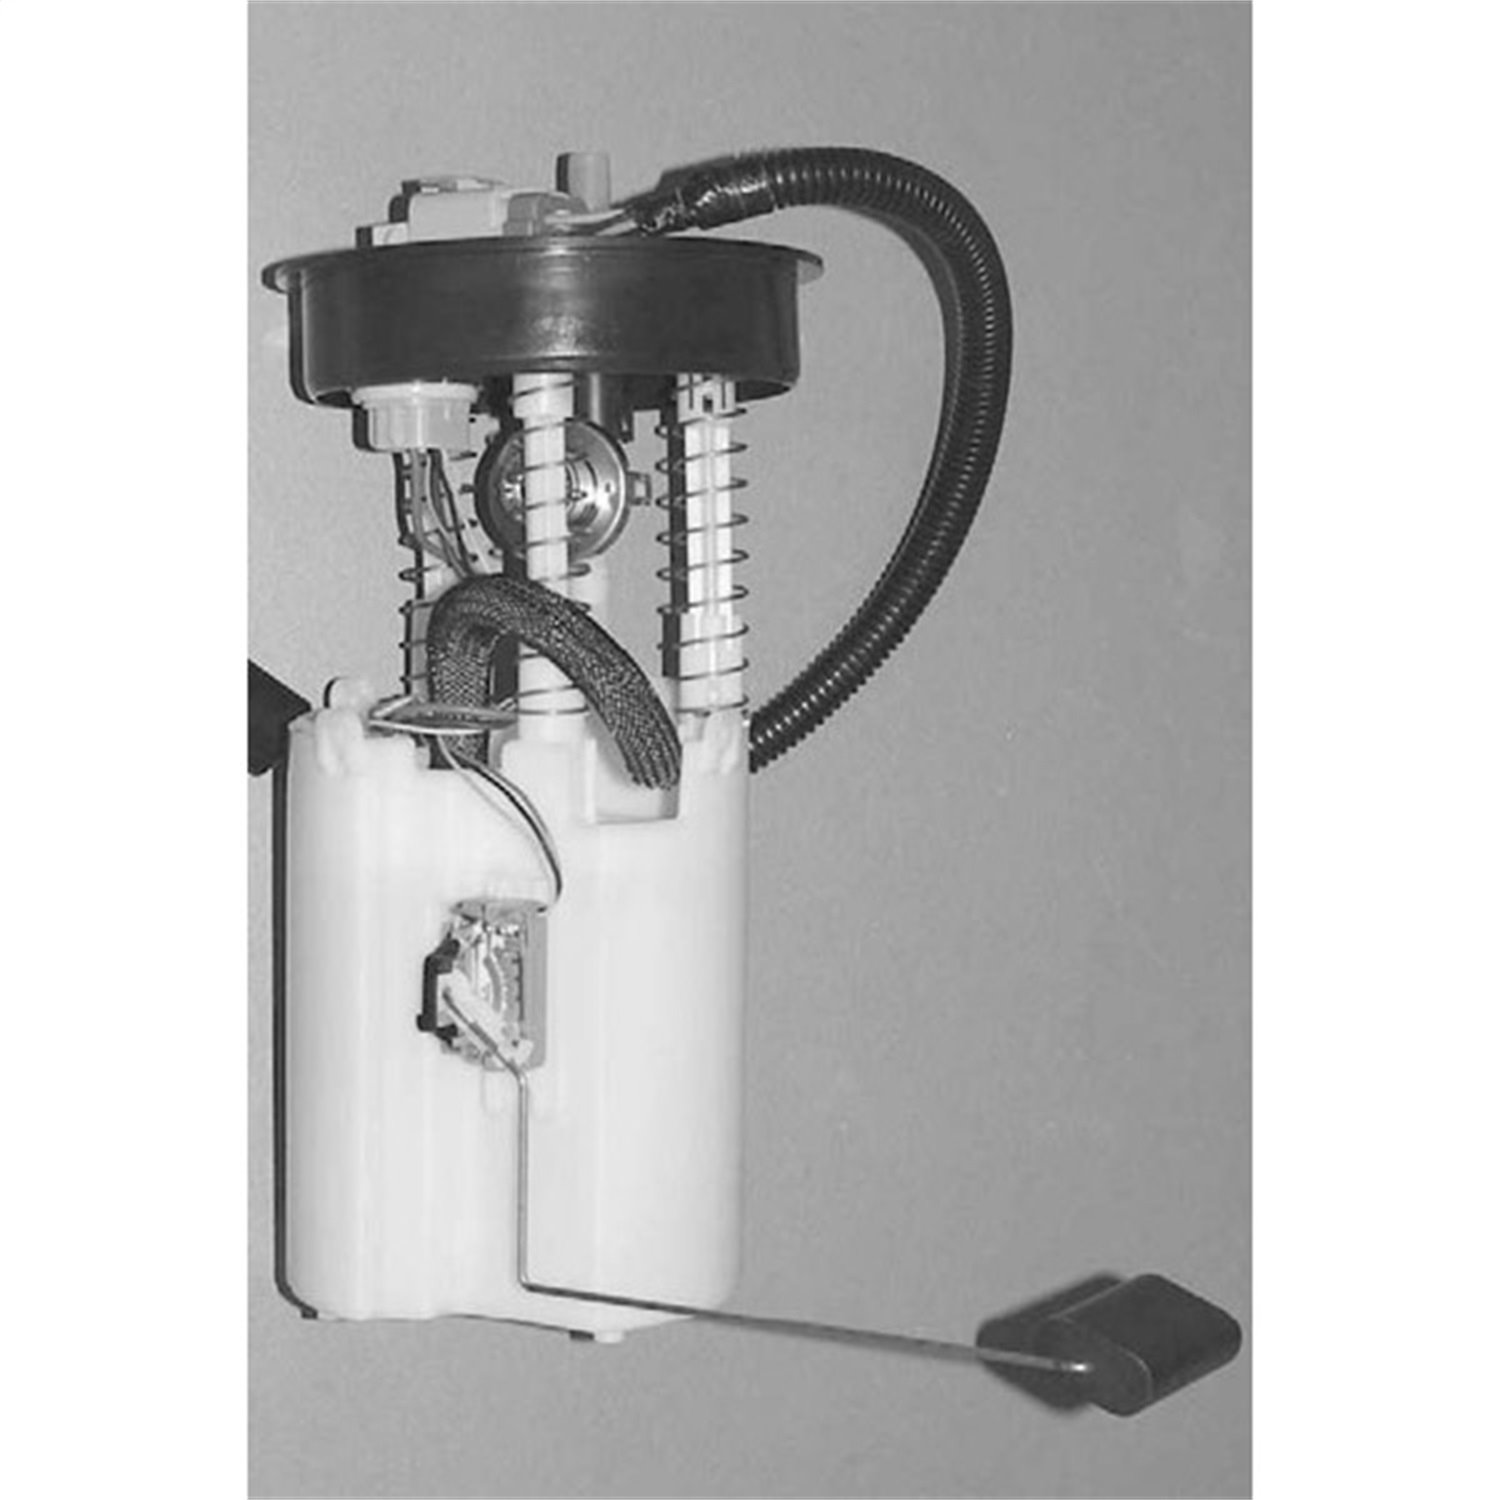 Replacement fuel pump module from Omix-ADA, Fits 1995 Jeep Grand Cherokee ZJ with 4.0L and 5.2L engines.